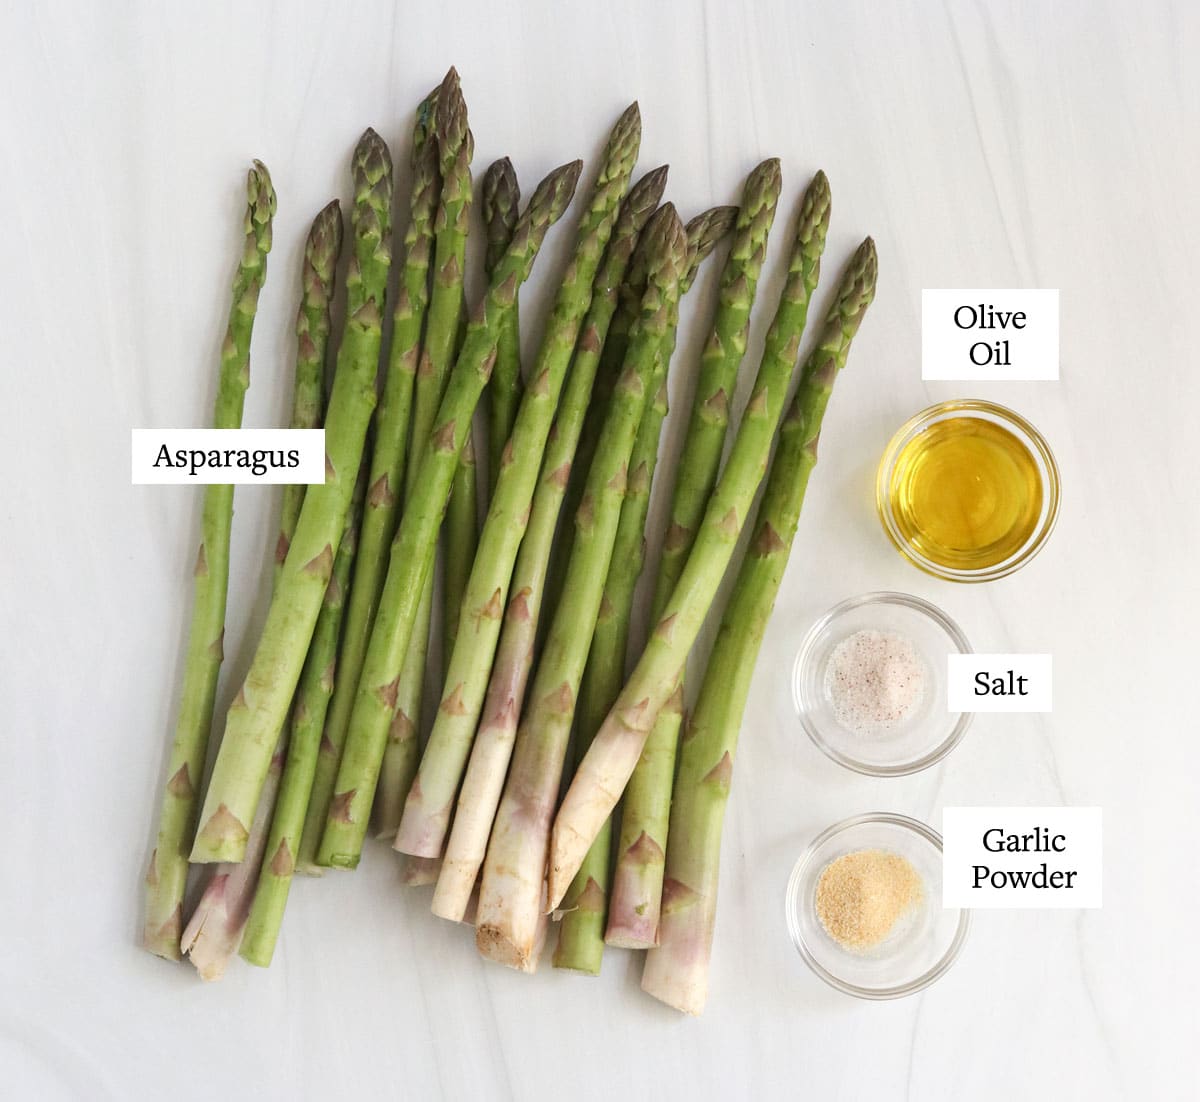 roasted asparagus ingredients on white surface.